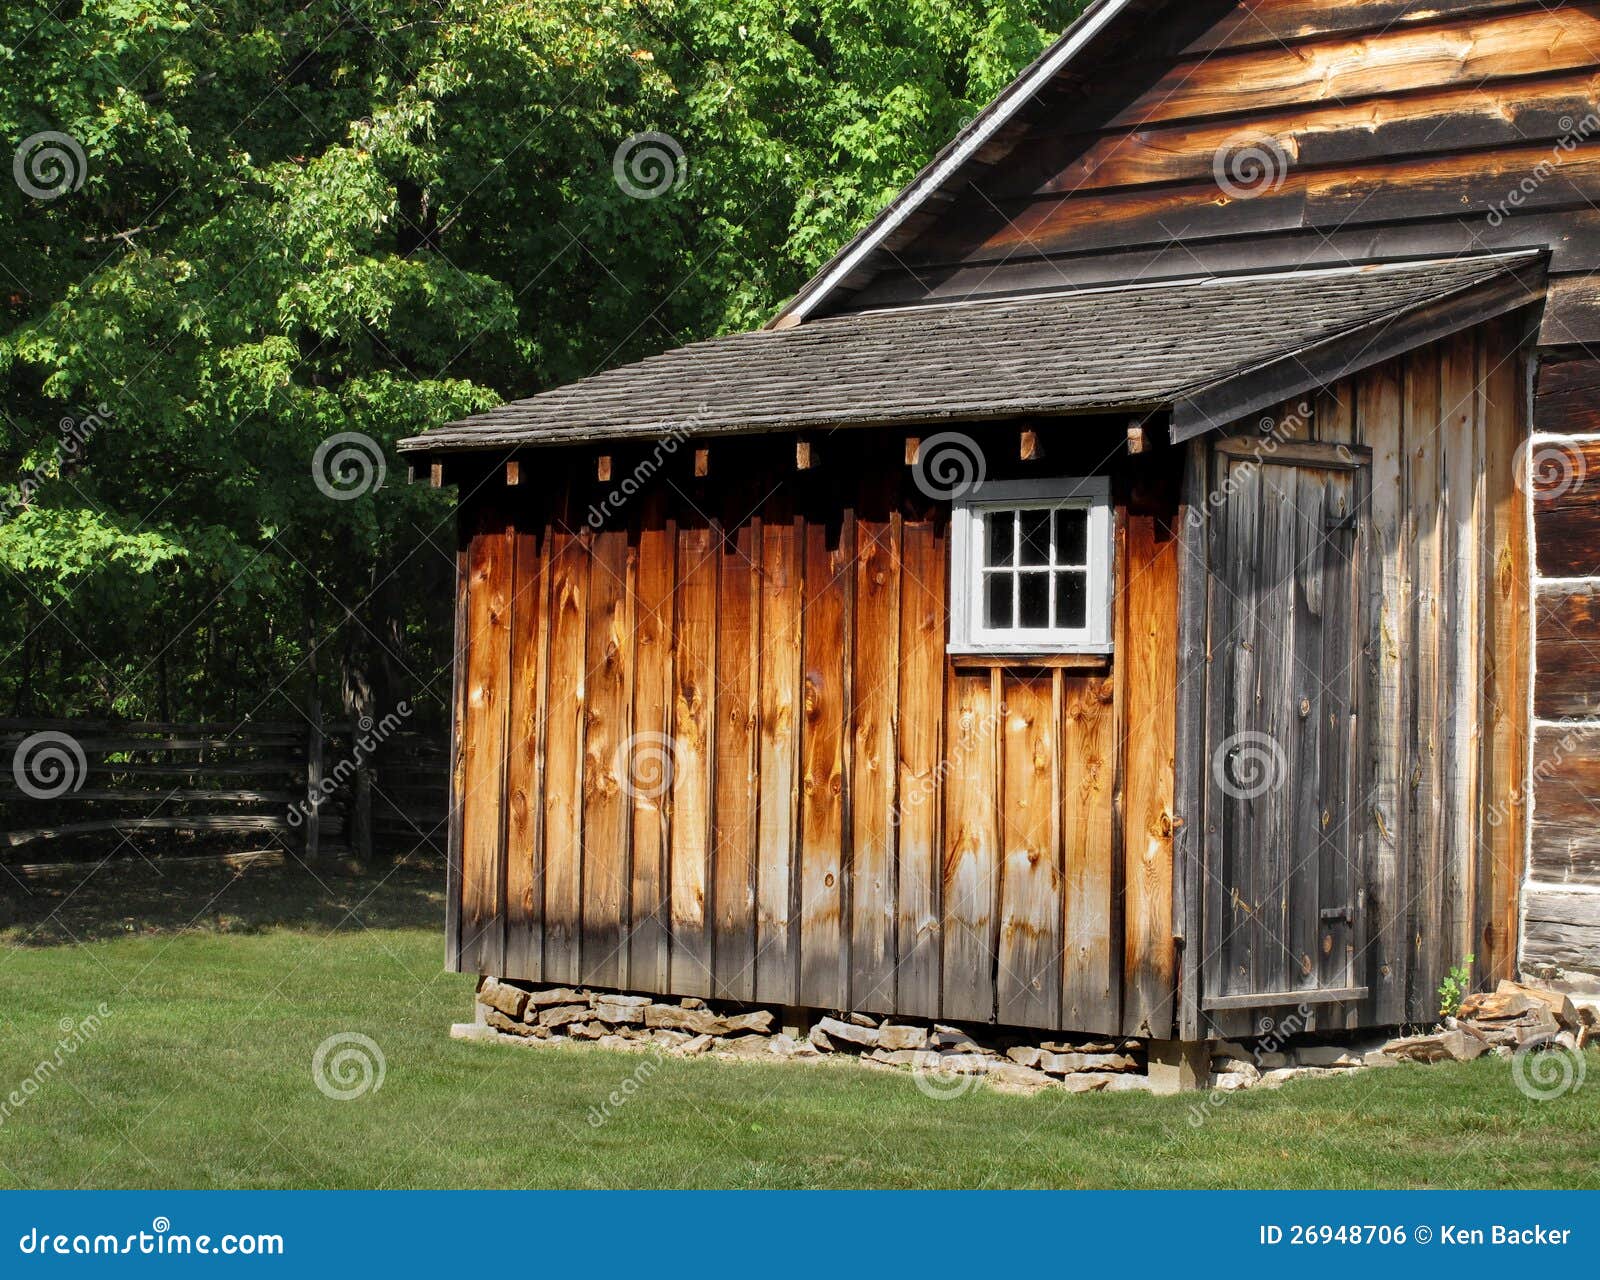 wooden shed with a window and door attached to another wooden building ...